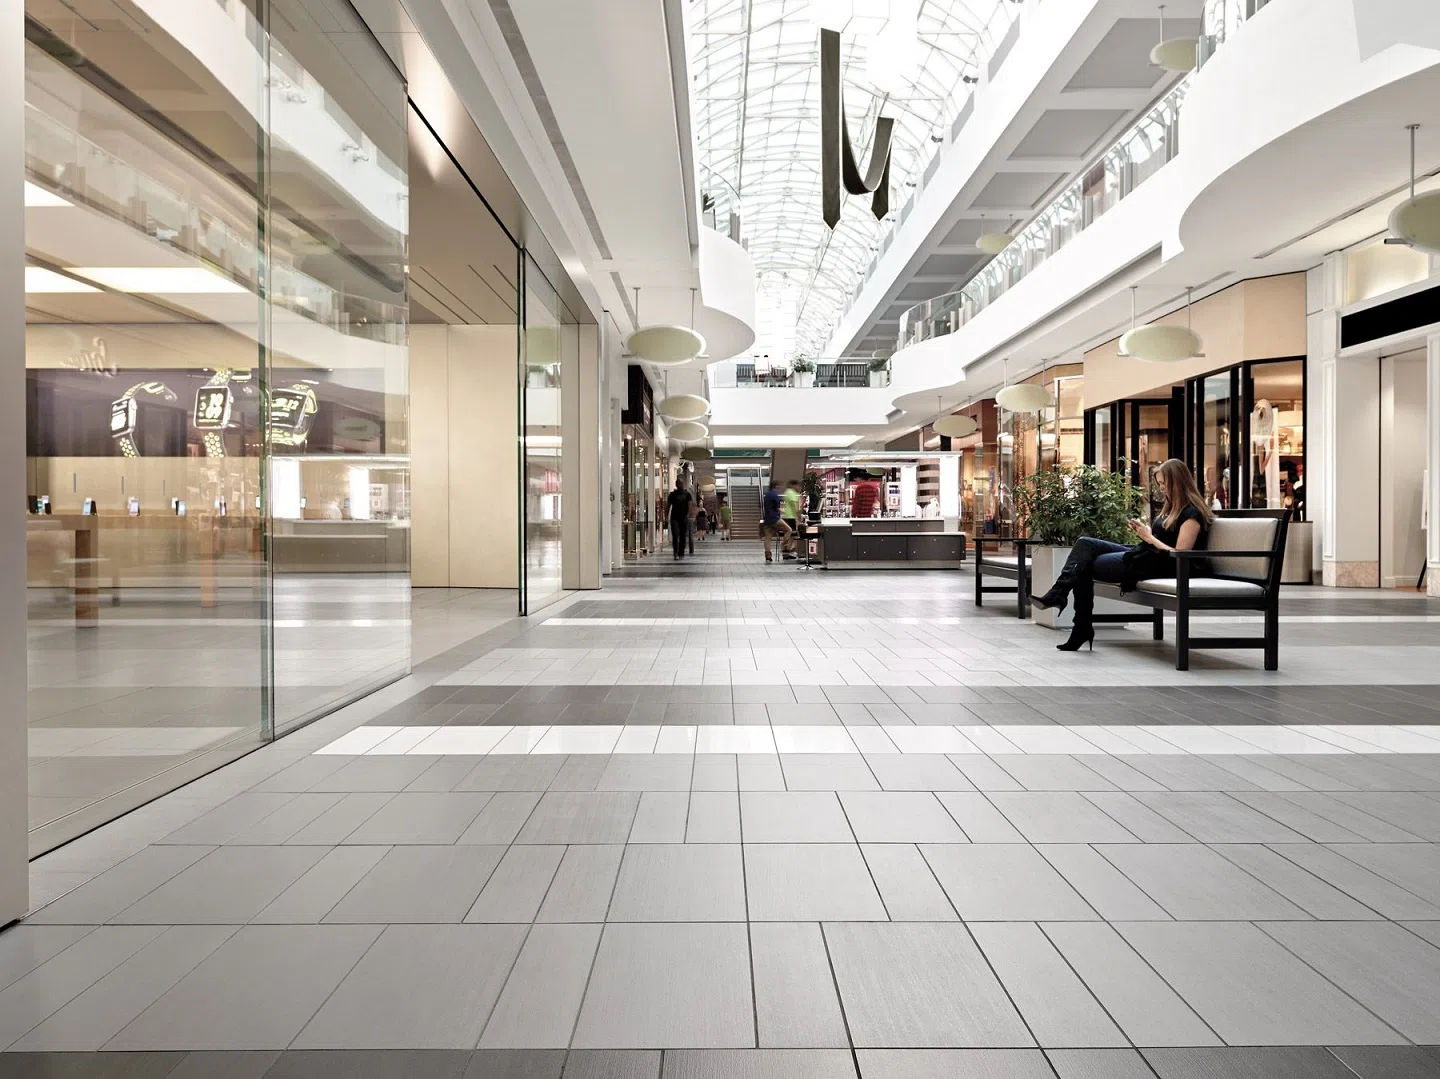 Choosing the Right Flooring Material; What Is The Best Flooring for a Mall?